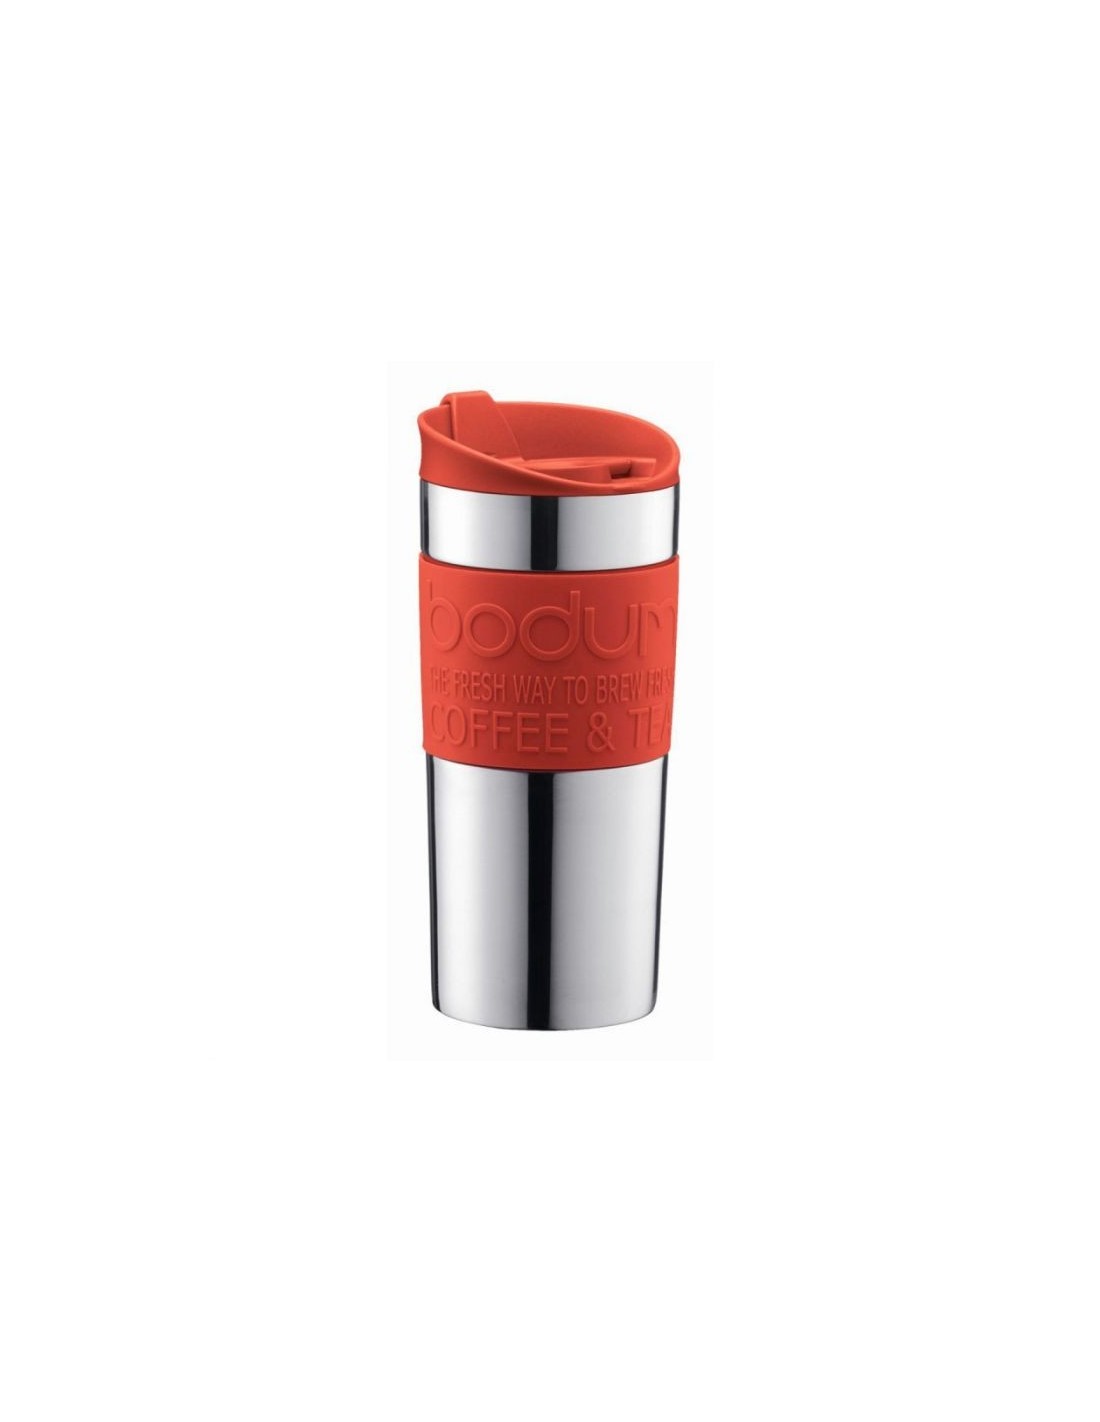 New Bodum Stainless Steel Travel Mug Black & Silver With Cork Cover 0.35L/12oz 